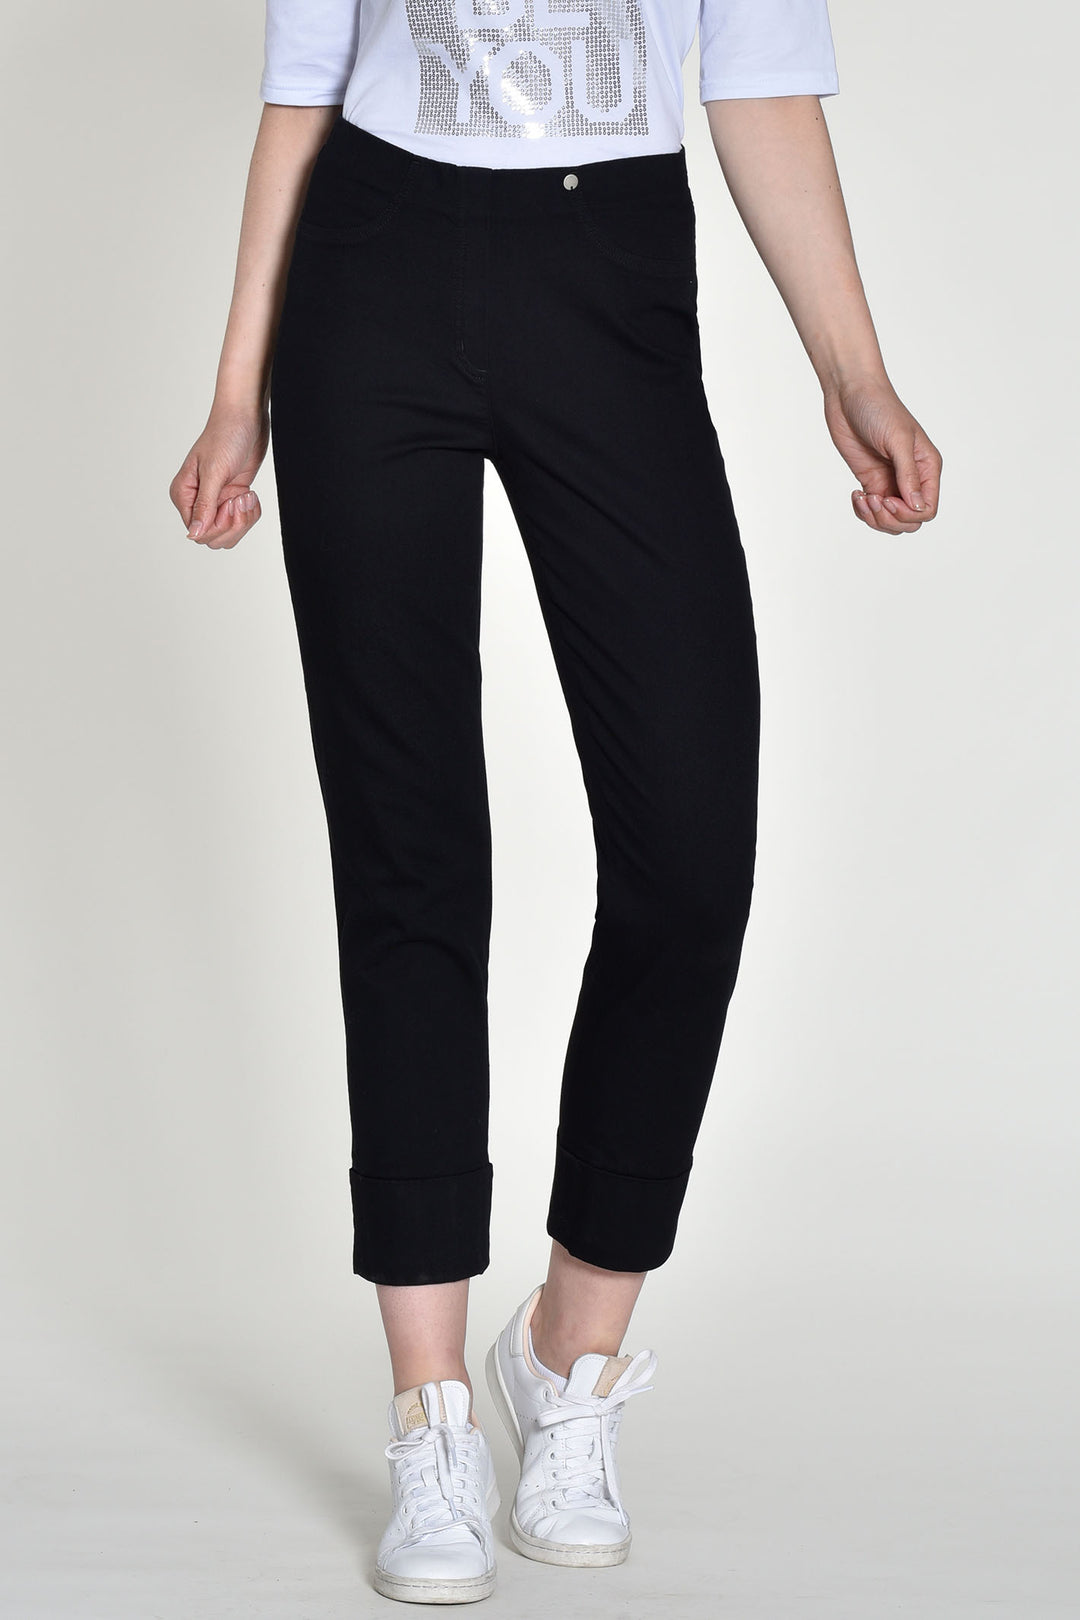 Robell 51628 5448 90 Bella 09 Black Trousers 68cm - Experience Boutique